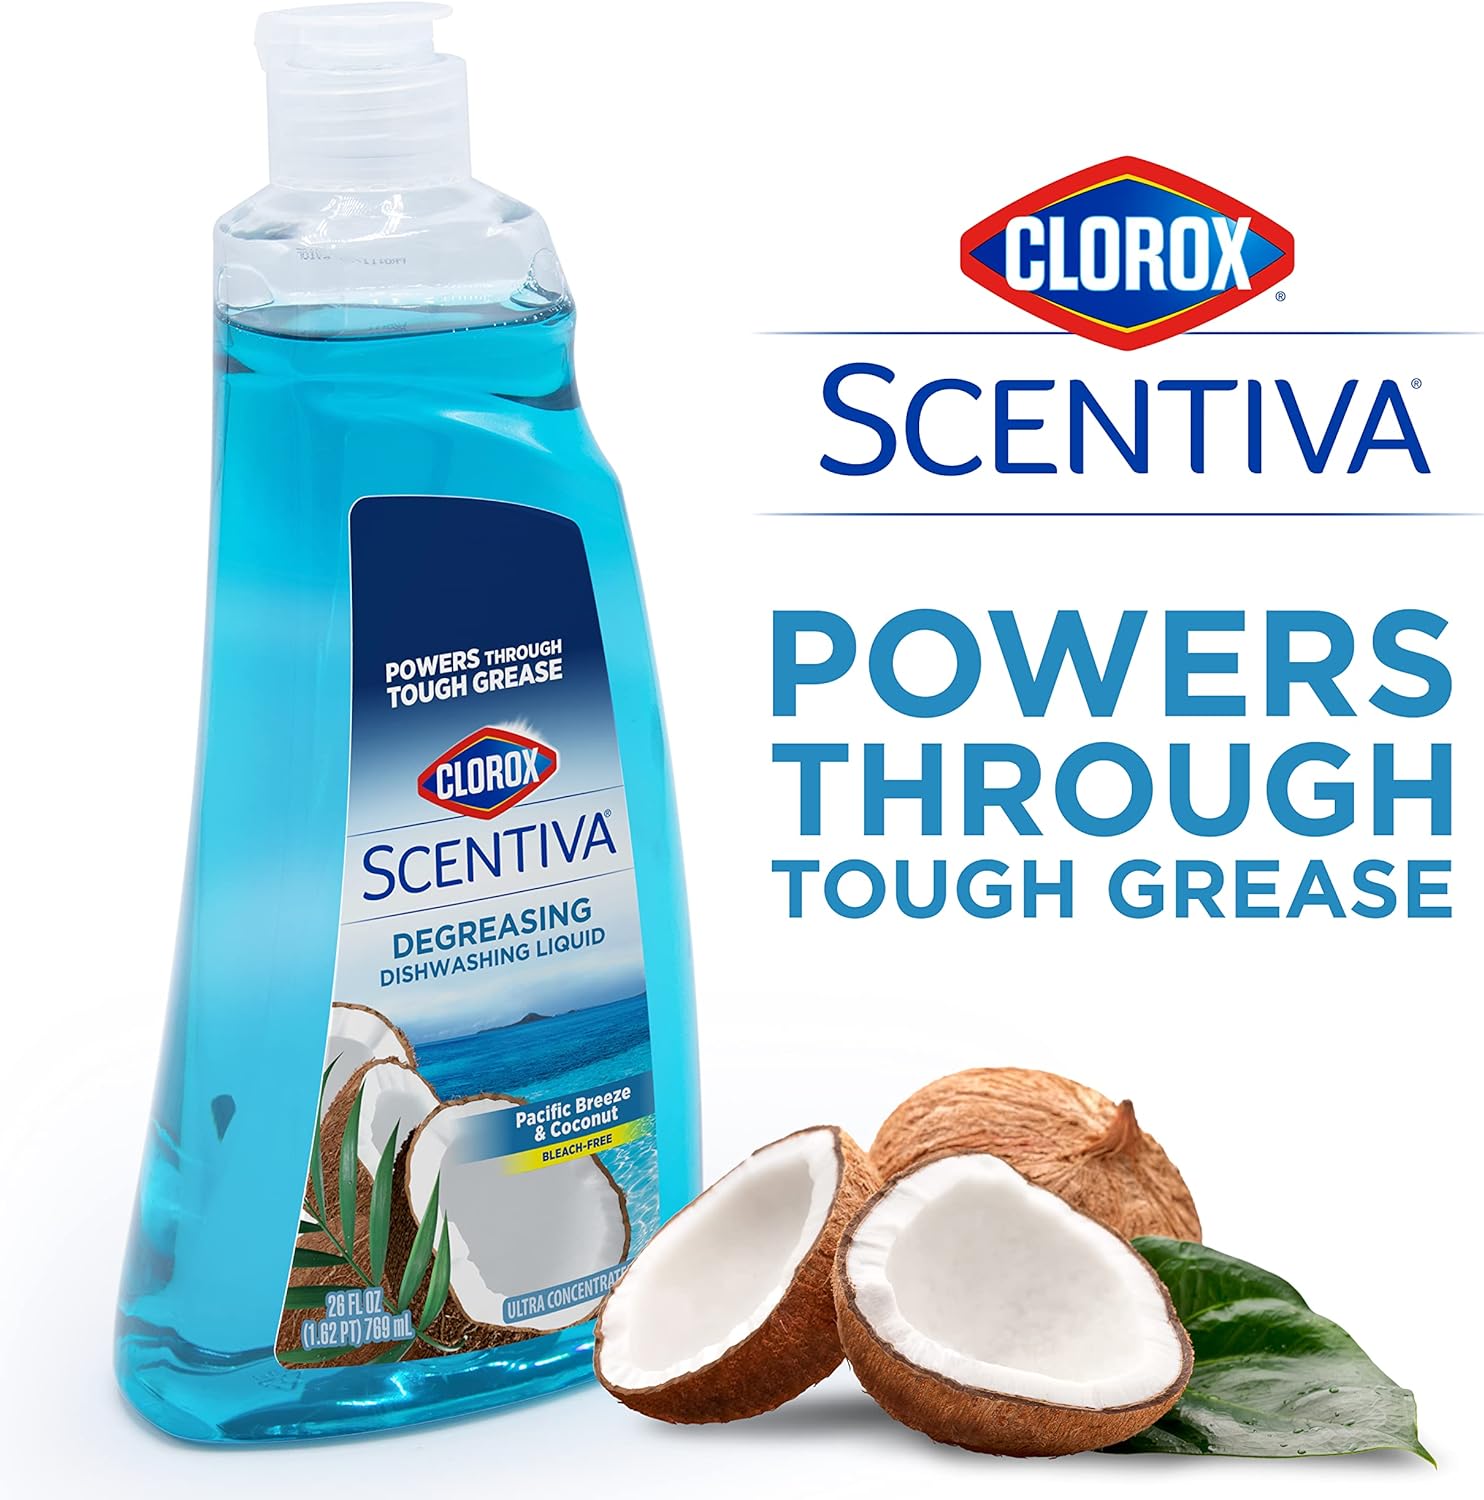 Clorox Scentiva Dishwashing Liquid Soap | Smells Great and Cuts Through Grease Fast | Quick Rinsing Formula for a Powerful Clean You Can Trust, Pacific Breeze & Coconut, 26 Oz (Pack of 6) : Health & Household